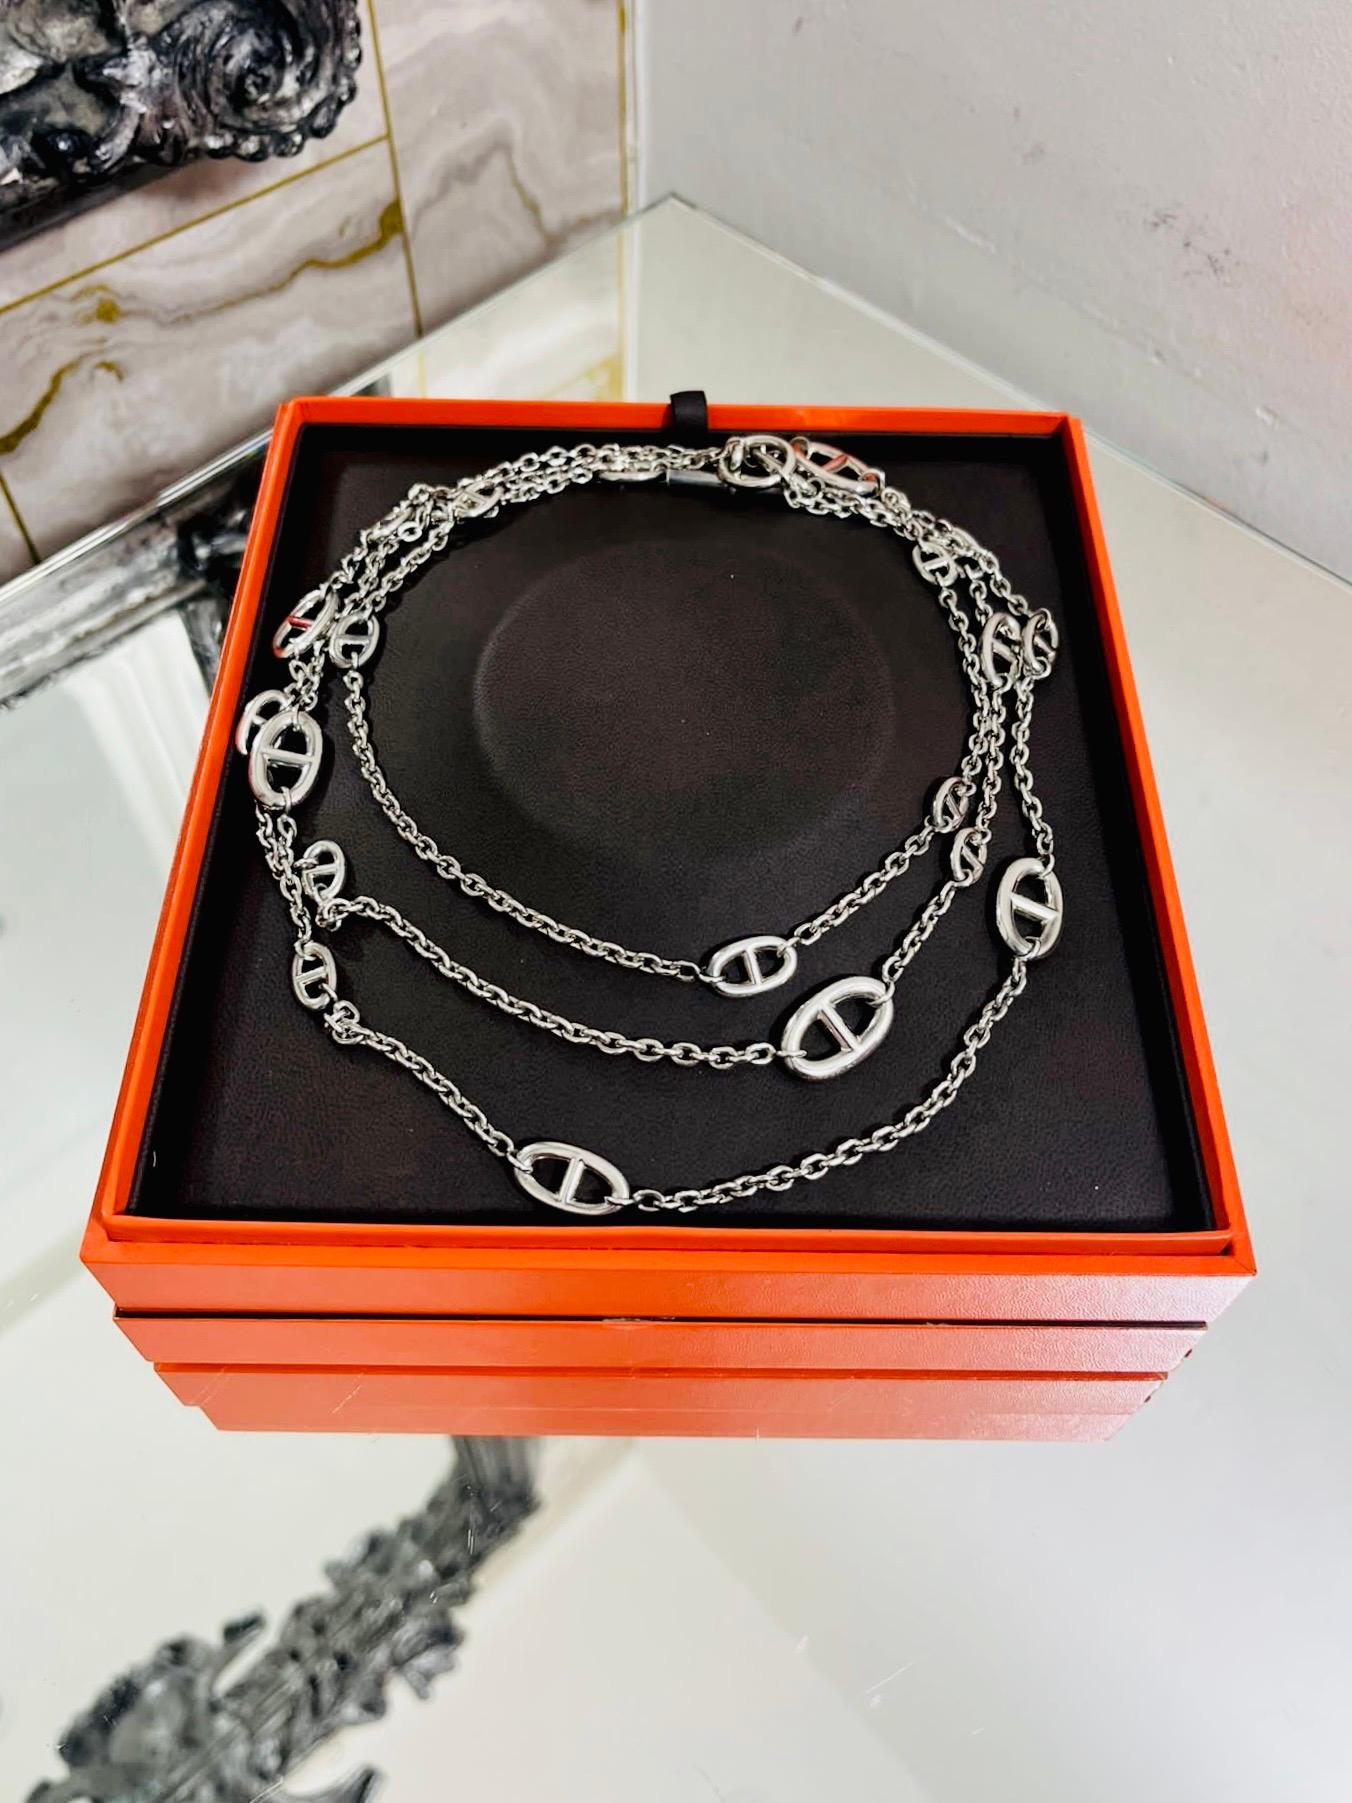 Hermes 925 Sterling Silver Extra Long Farondole Necklace

Iconic silver very long necklace that can be worn multiple ways, with toggle style

closure.

Size - 160cm

Condition - 925 Sterling Silver

Composition - Fair/Good  (Scratches and some